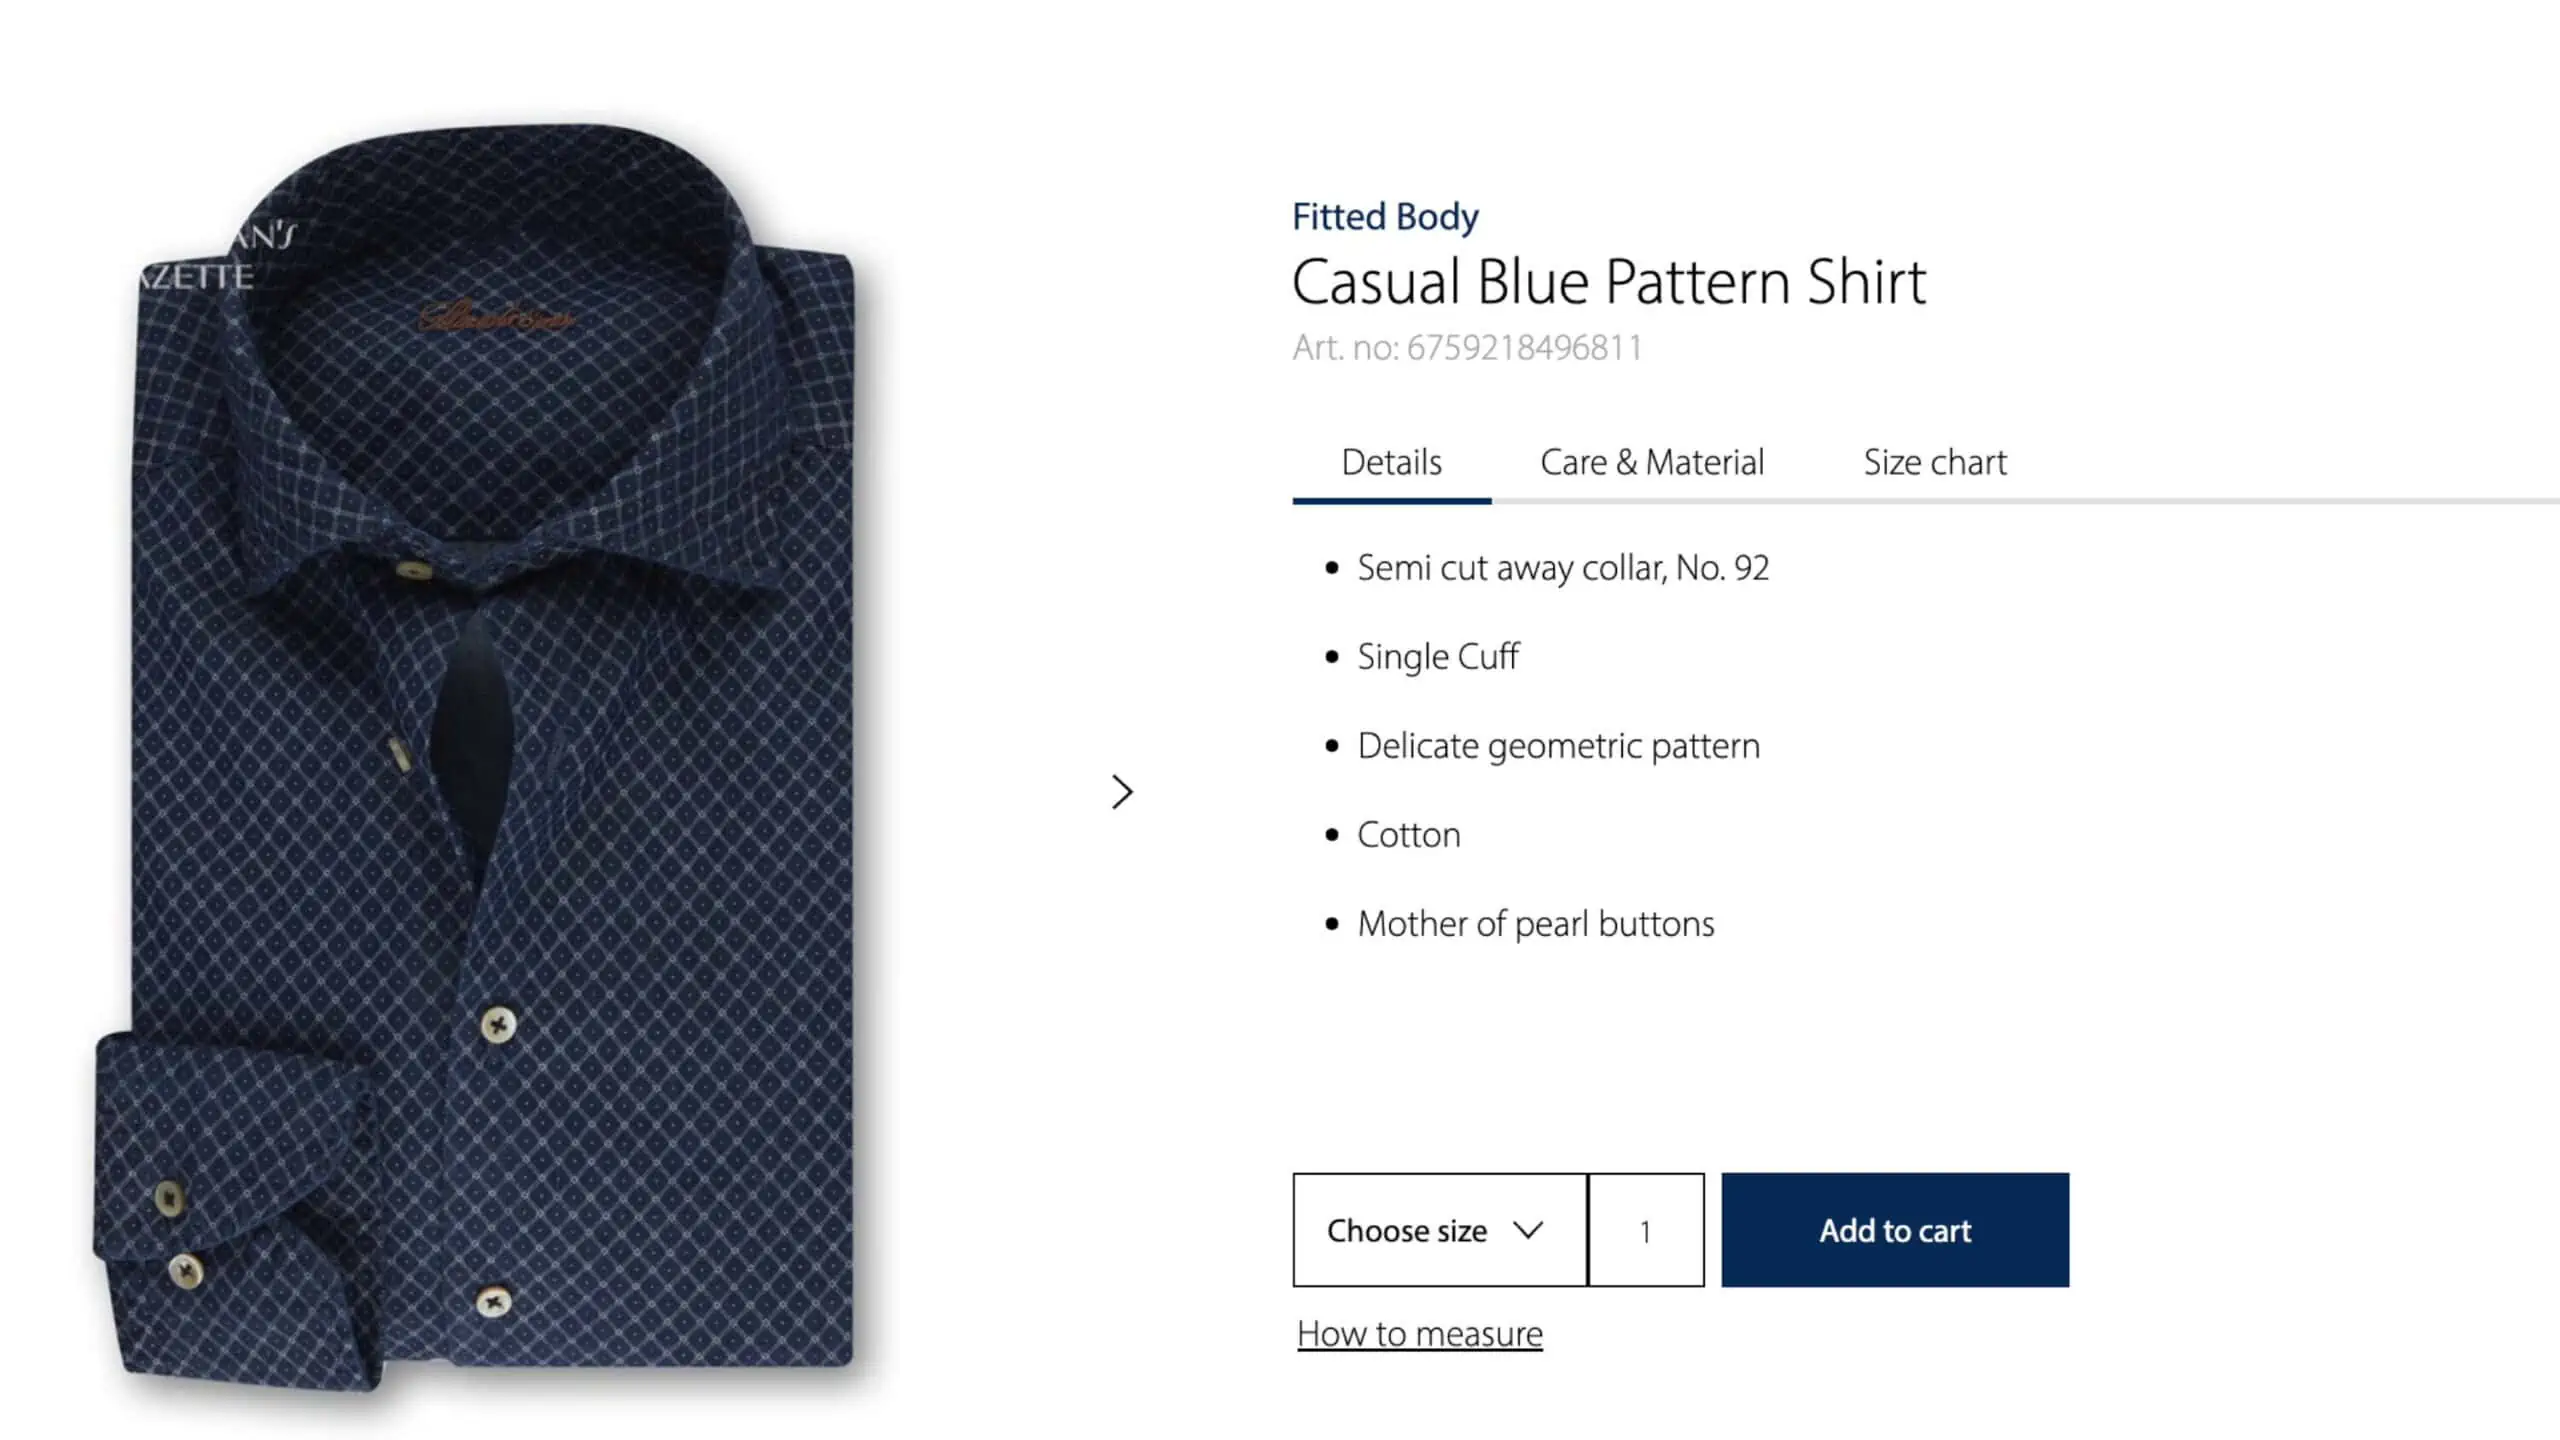 Casual blue patterned shirt. Style, quality and comfort in every detail.